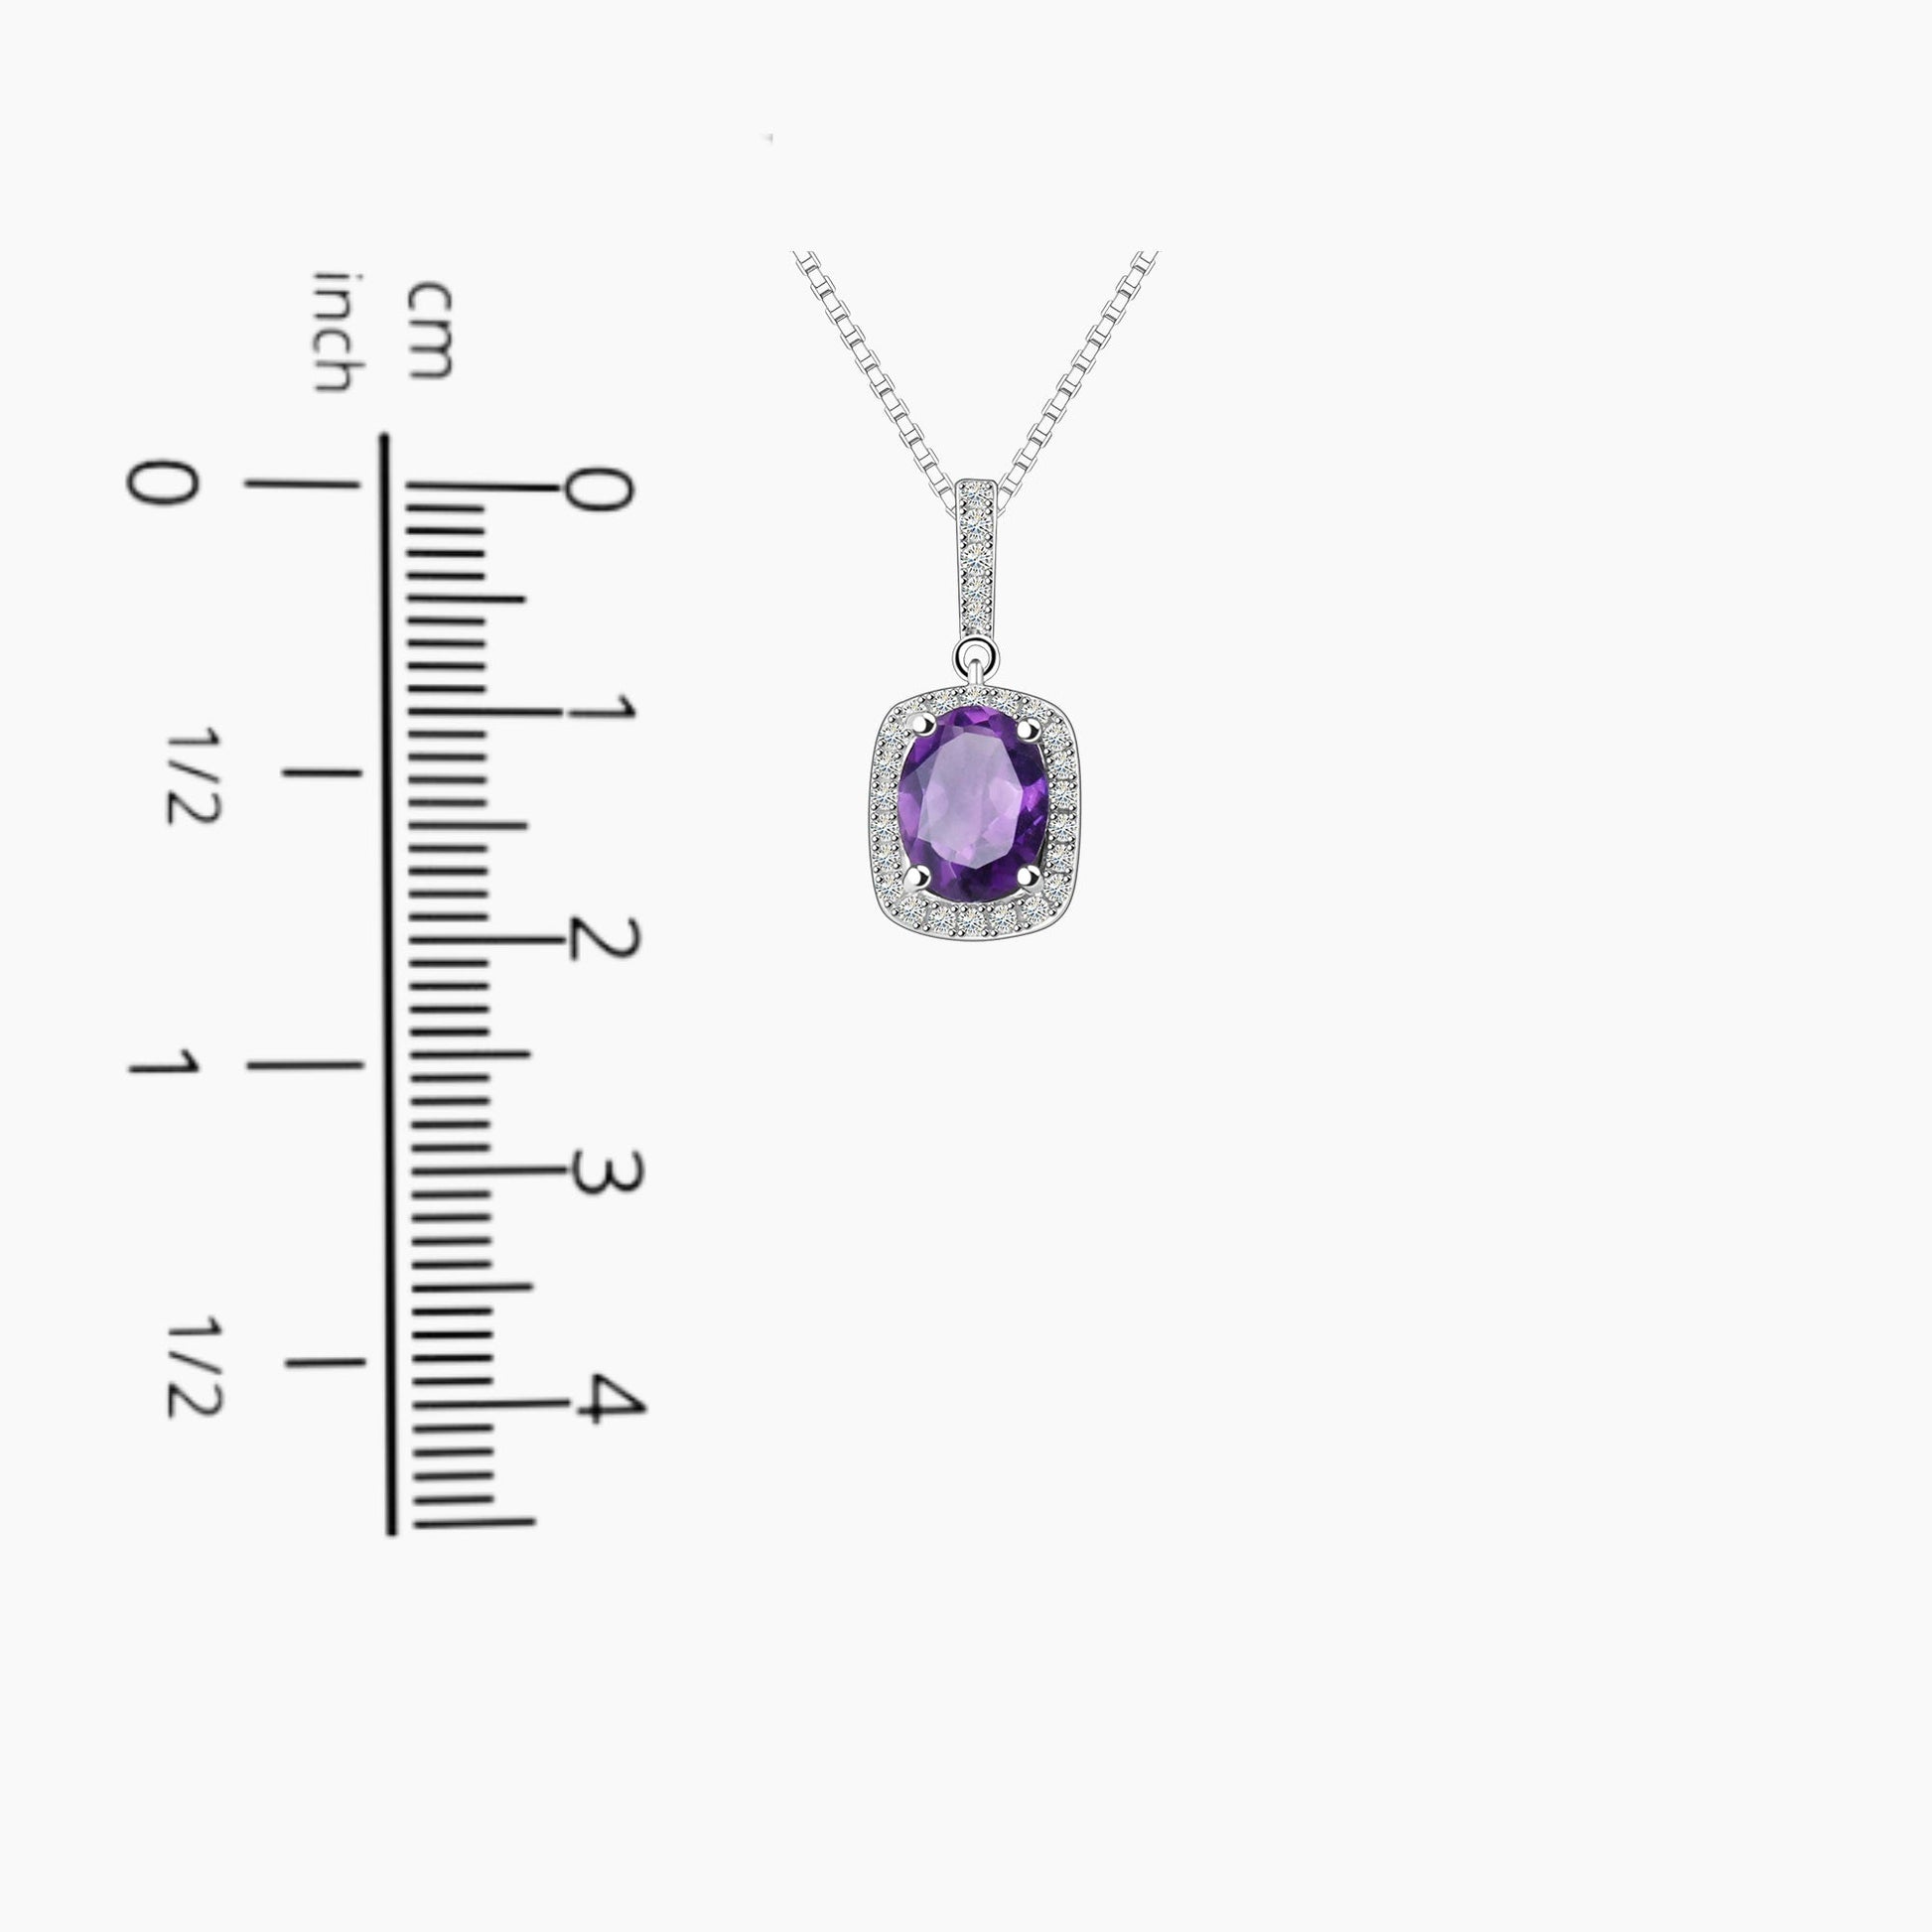 Cushion Cut Amethyst & CZ Pendant displayed on a scale to accurately represent its size and dimensions.